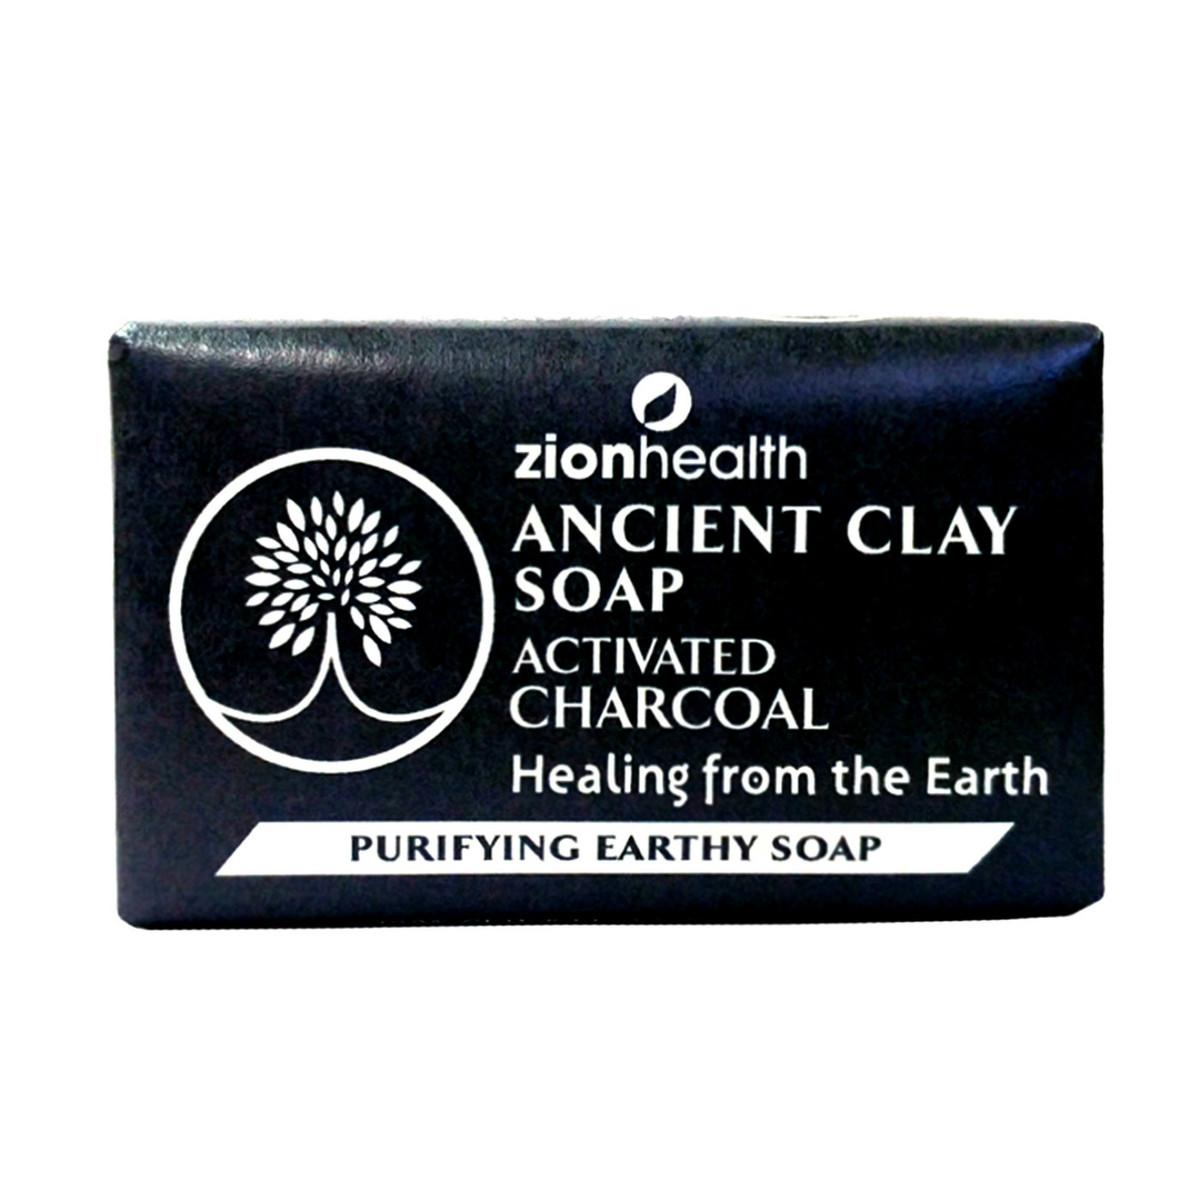 Zion Health "Activated Charcoal Ancient Clay Soap" 6 oz